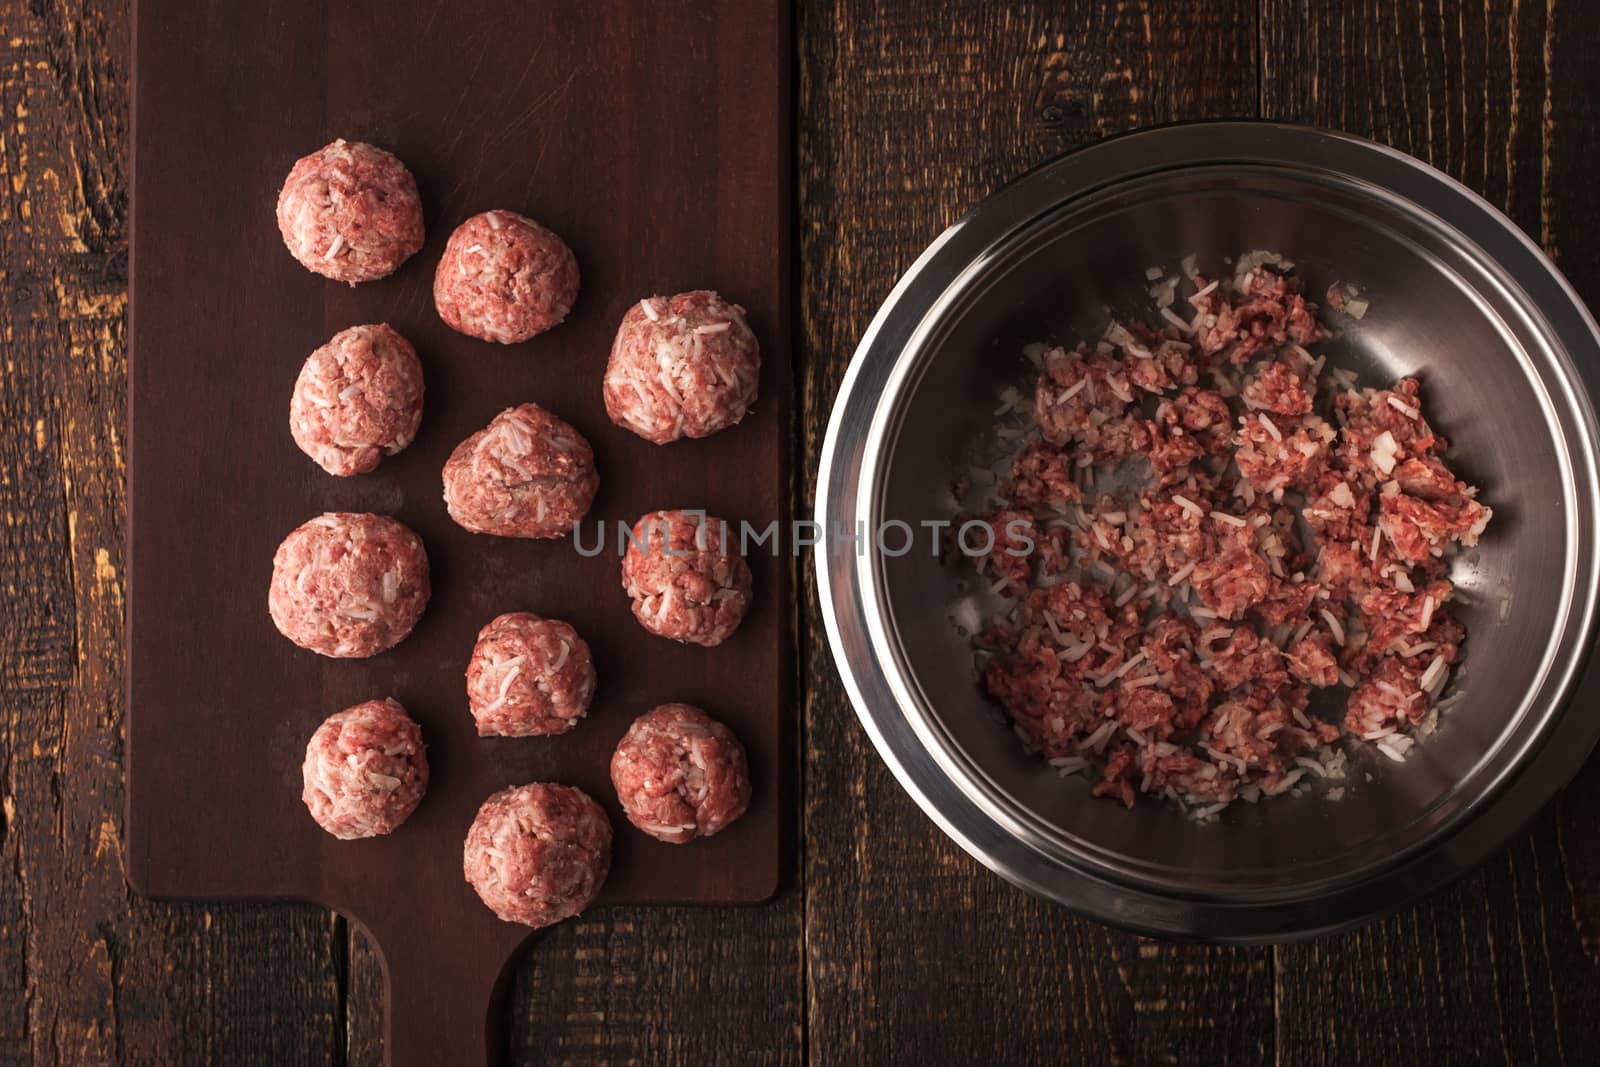 Meatballs on the wooden board with stuffing in a pan top view horizontal